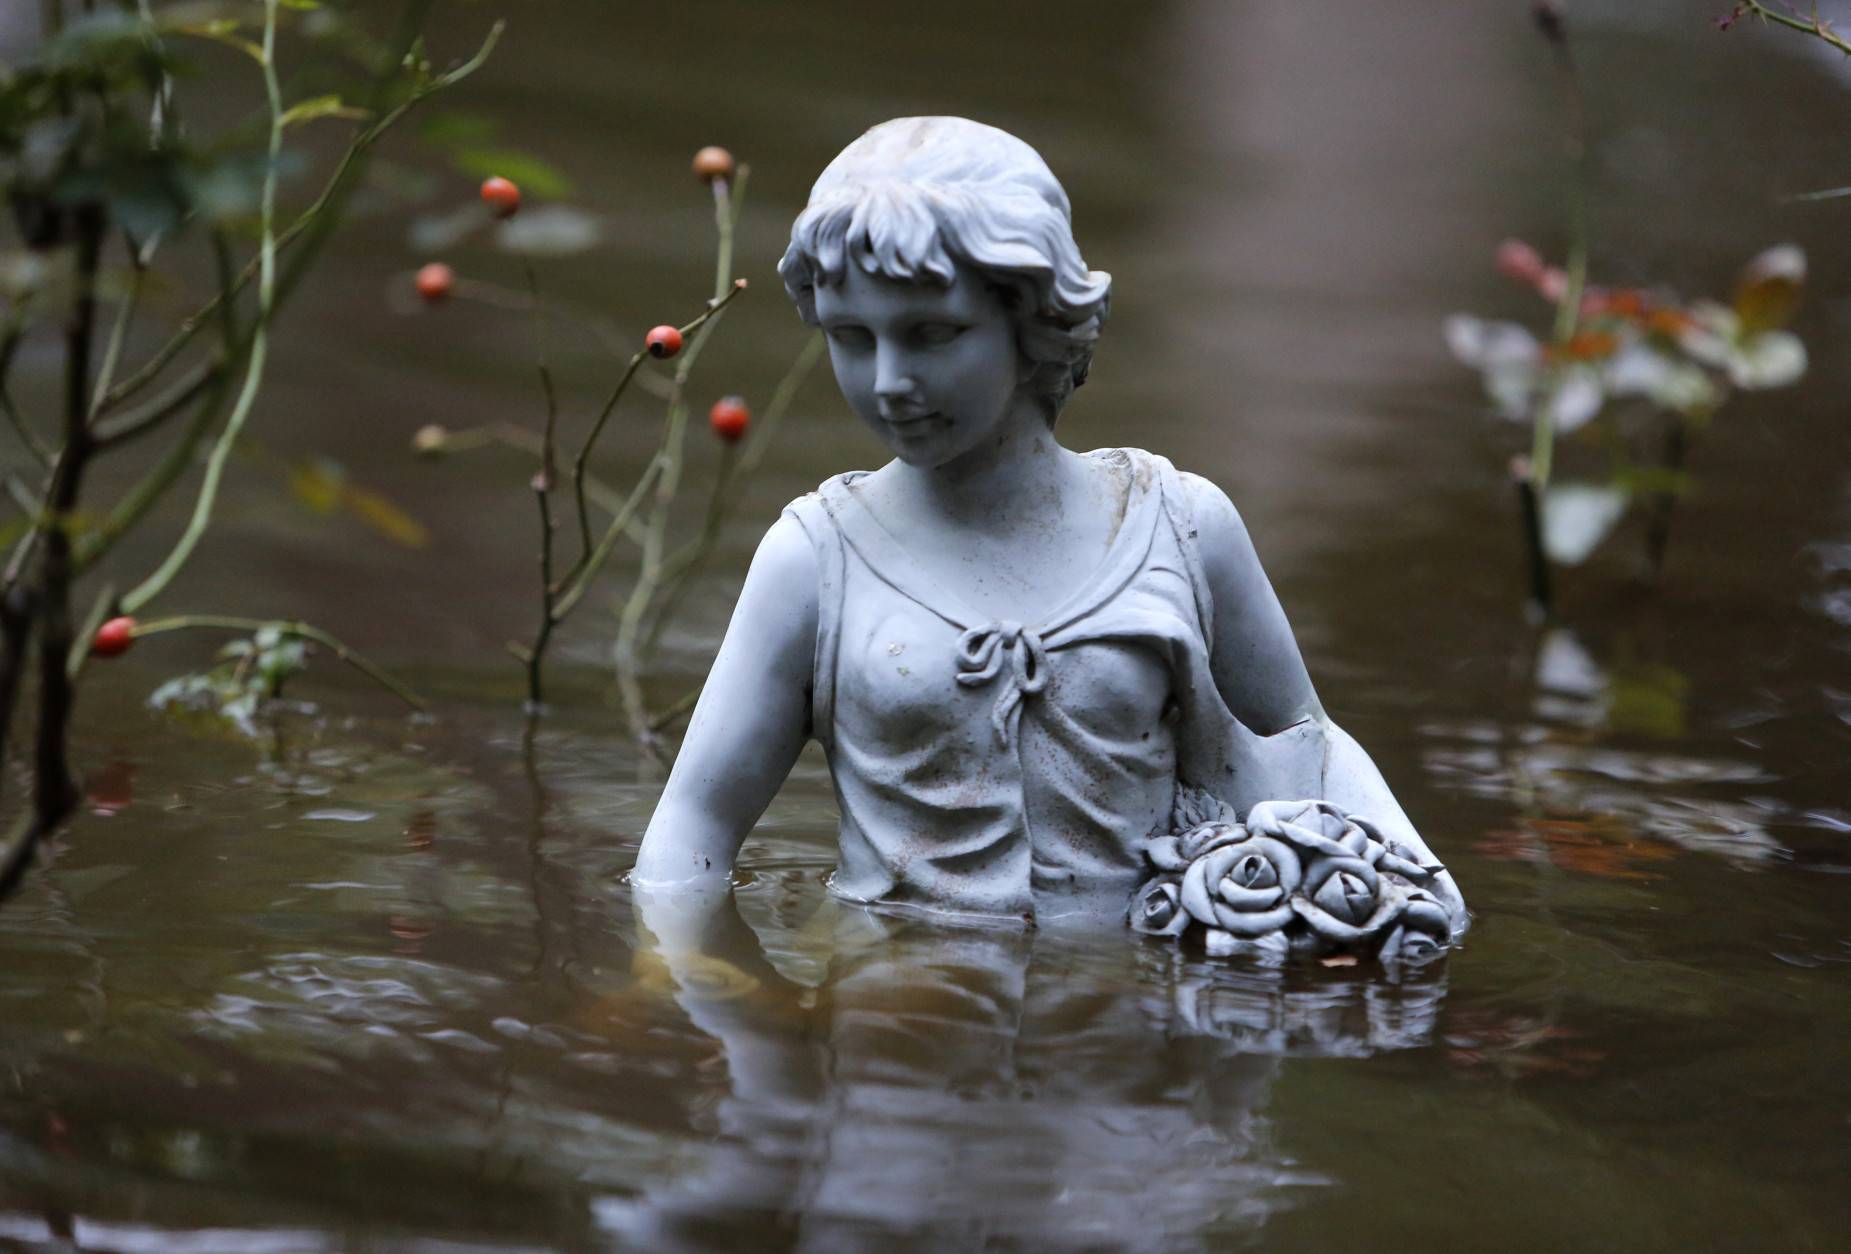 A statue in flood waters in the Ashborough subdivision near Summerville, S.C., Monday, Oct. 5, 2015. South Carolina is still struggling with flood waters due to a slow moving storm system. (AP Photo/Mic Smith)